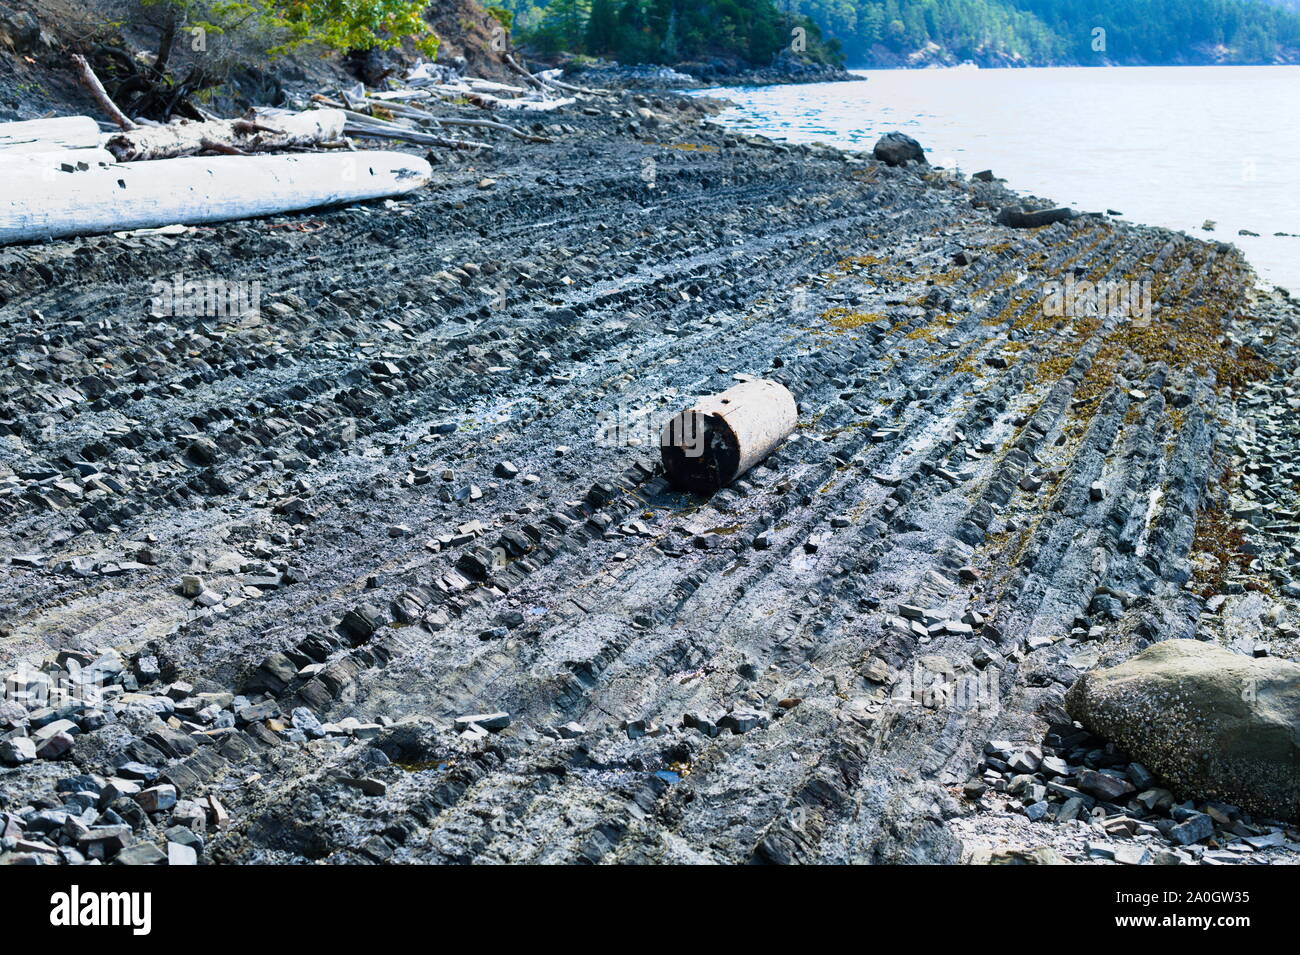 Sedimentary rock layers visible on the beach on North Pender Island, British Columbia, Canada Stock Photo